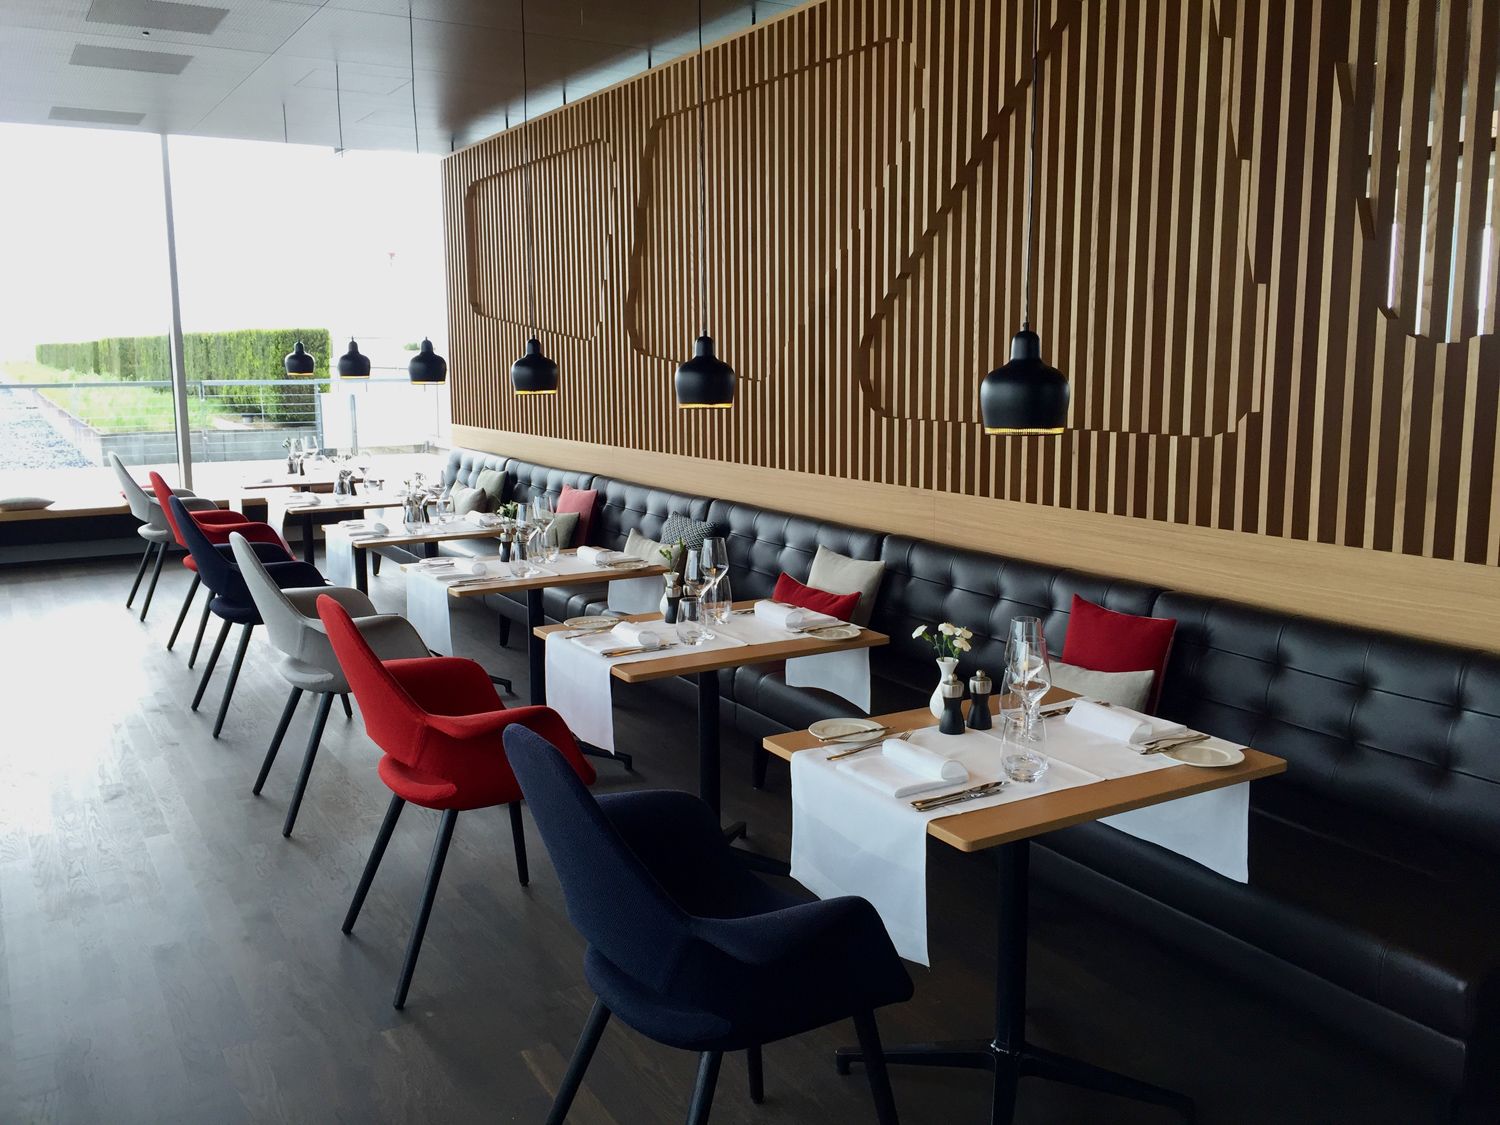 Gallery: Swiss' first class lounge at Zurich Airport